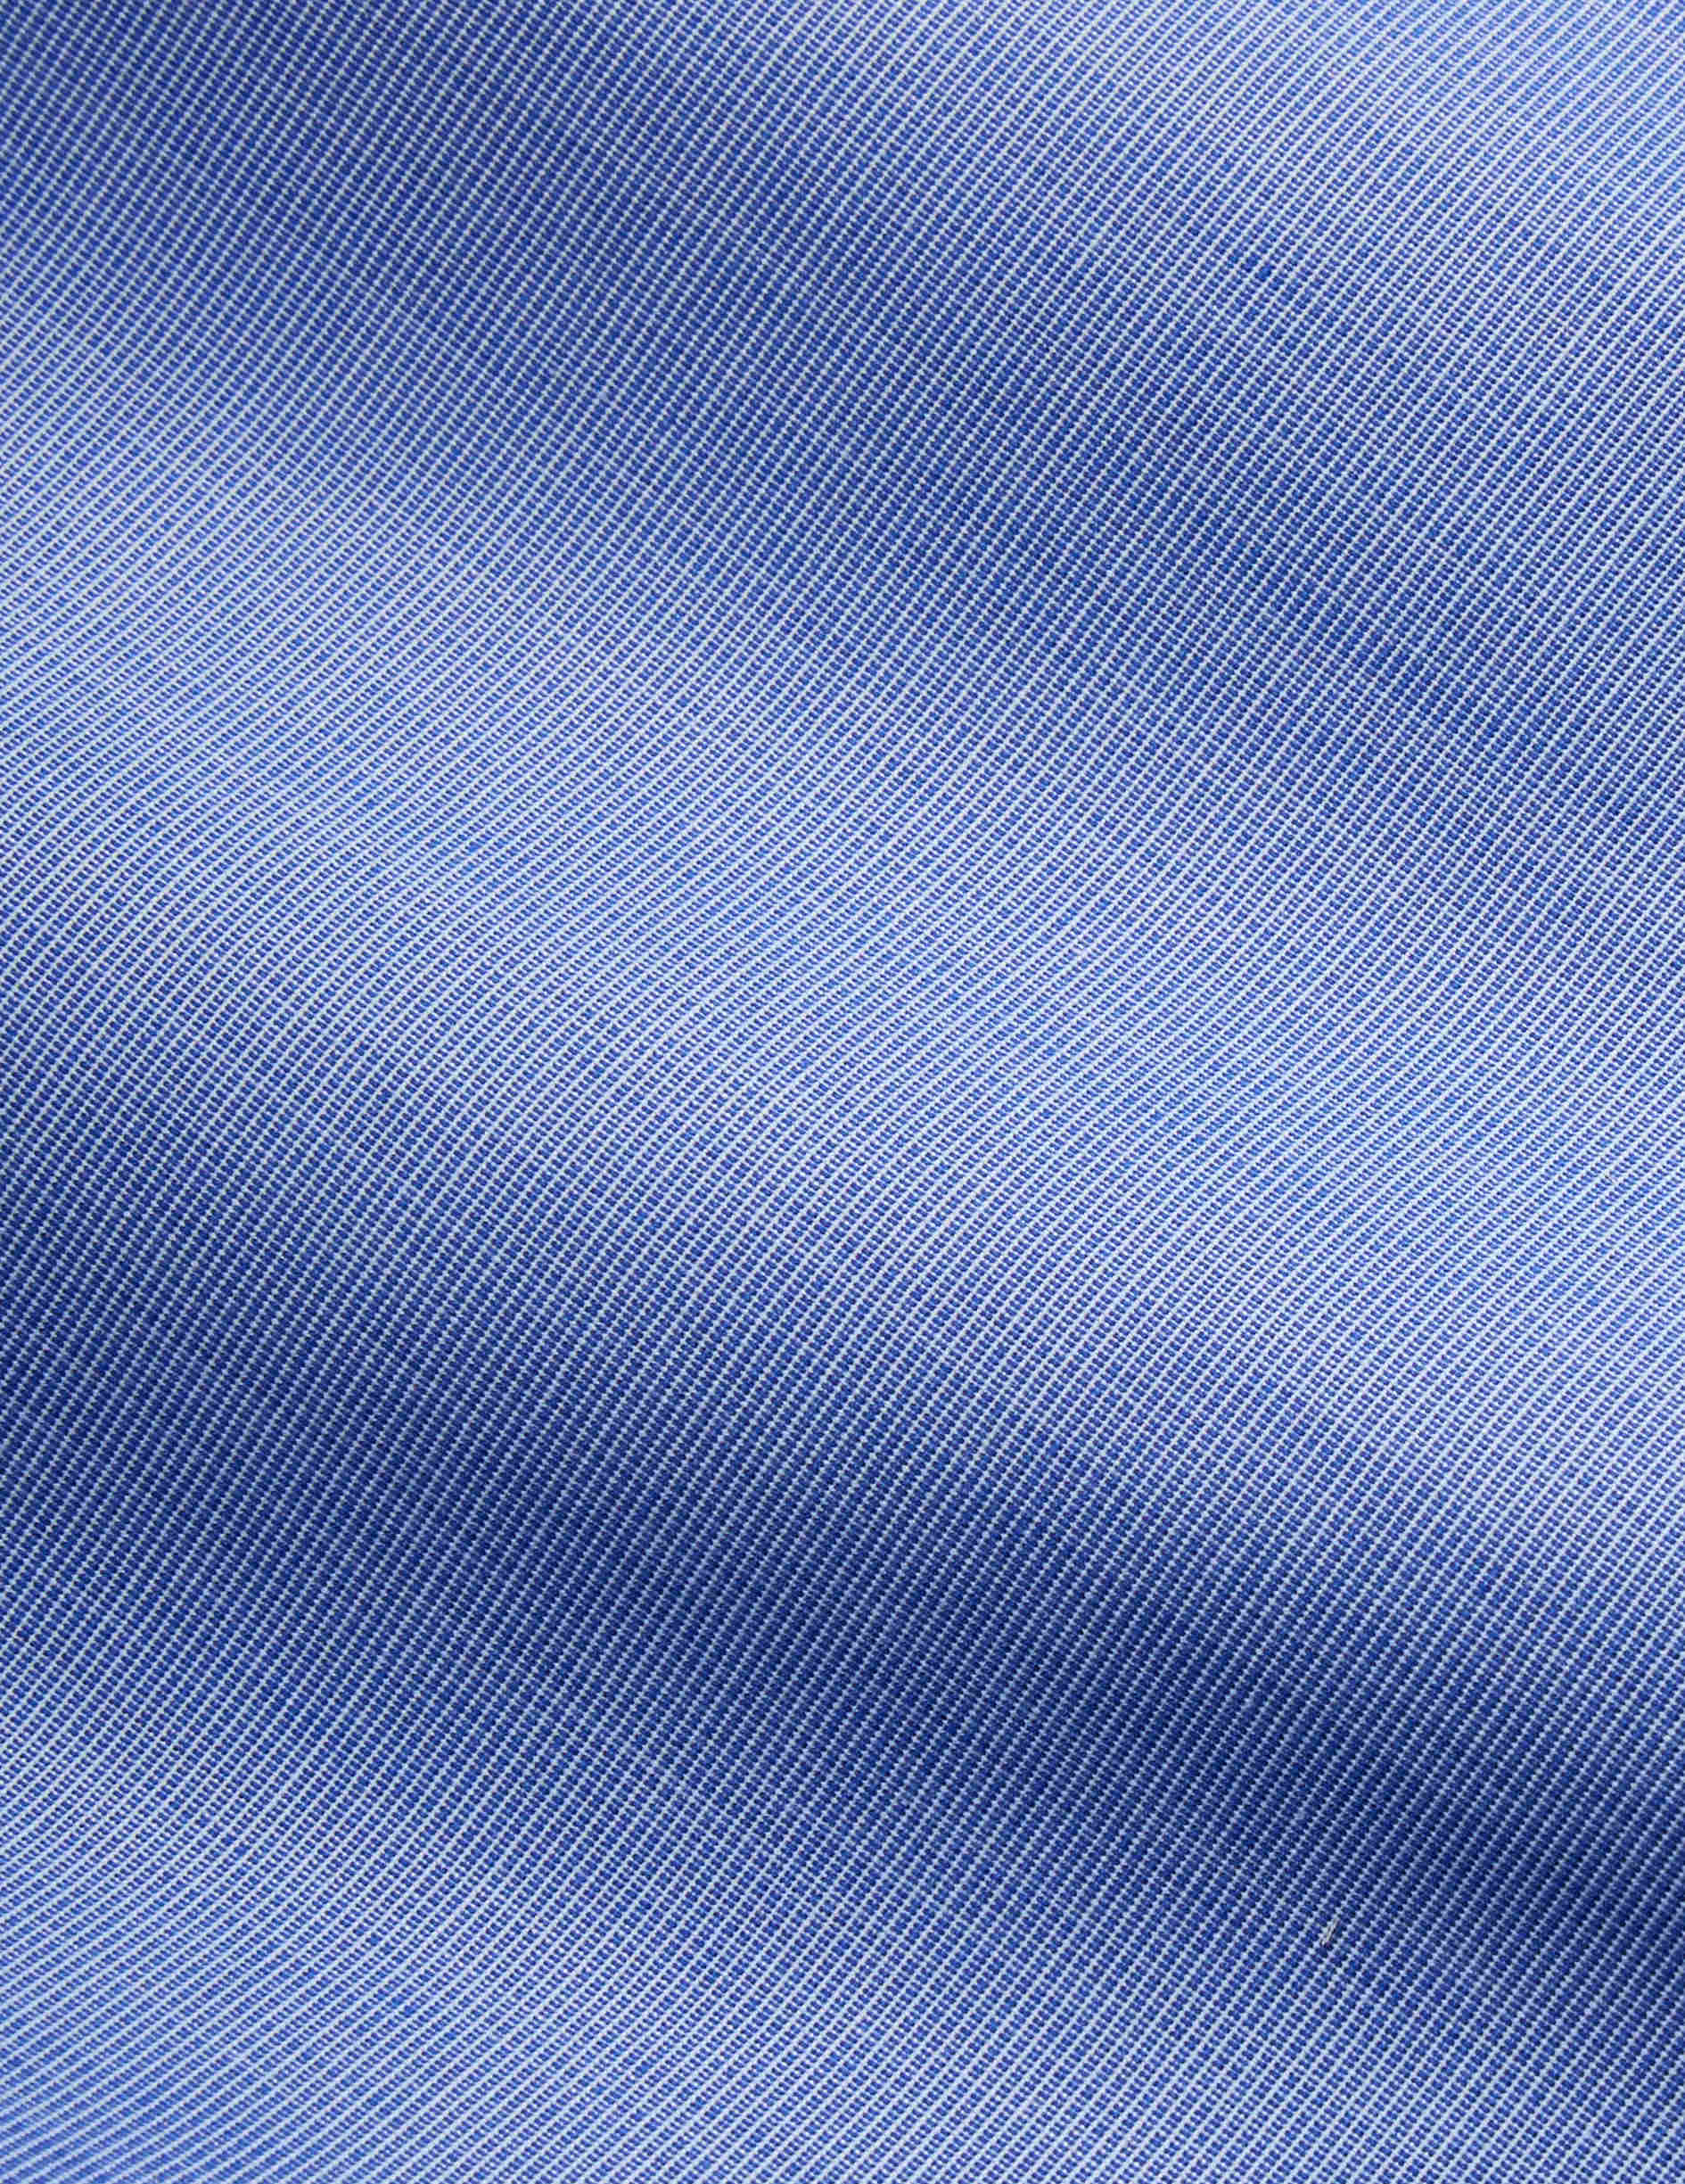 Semi-fitted blue shirt - Wire to wire - Figaret Collar